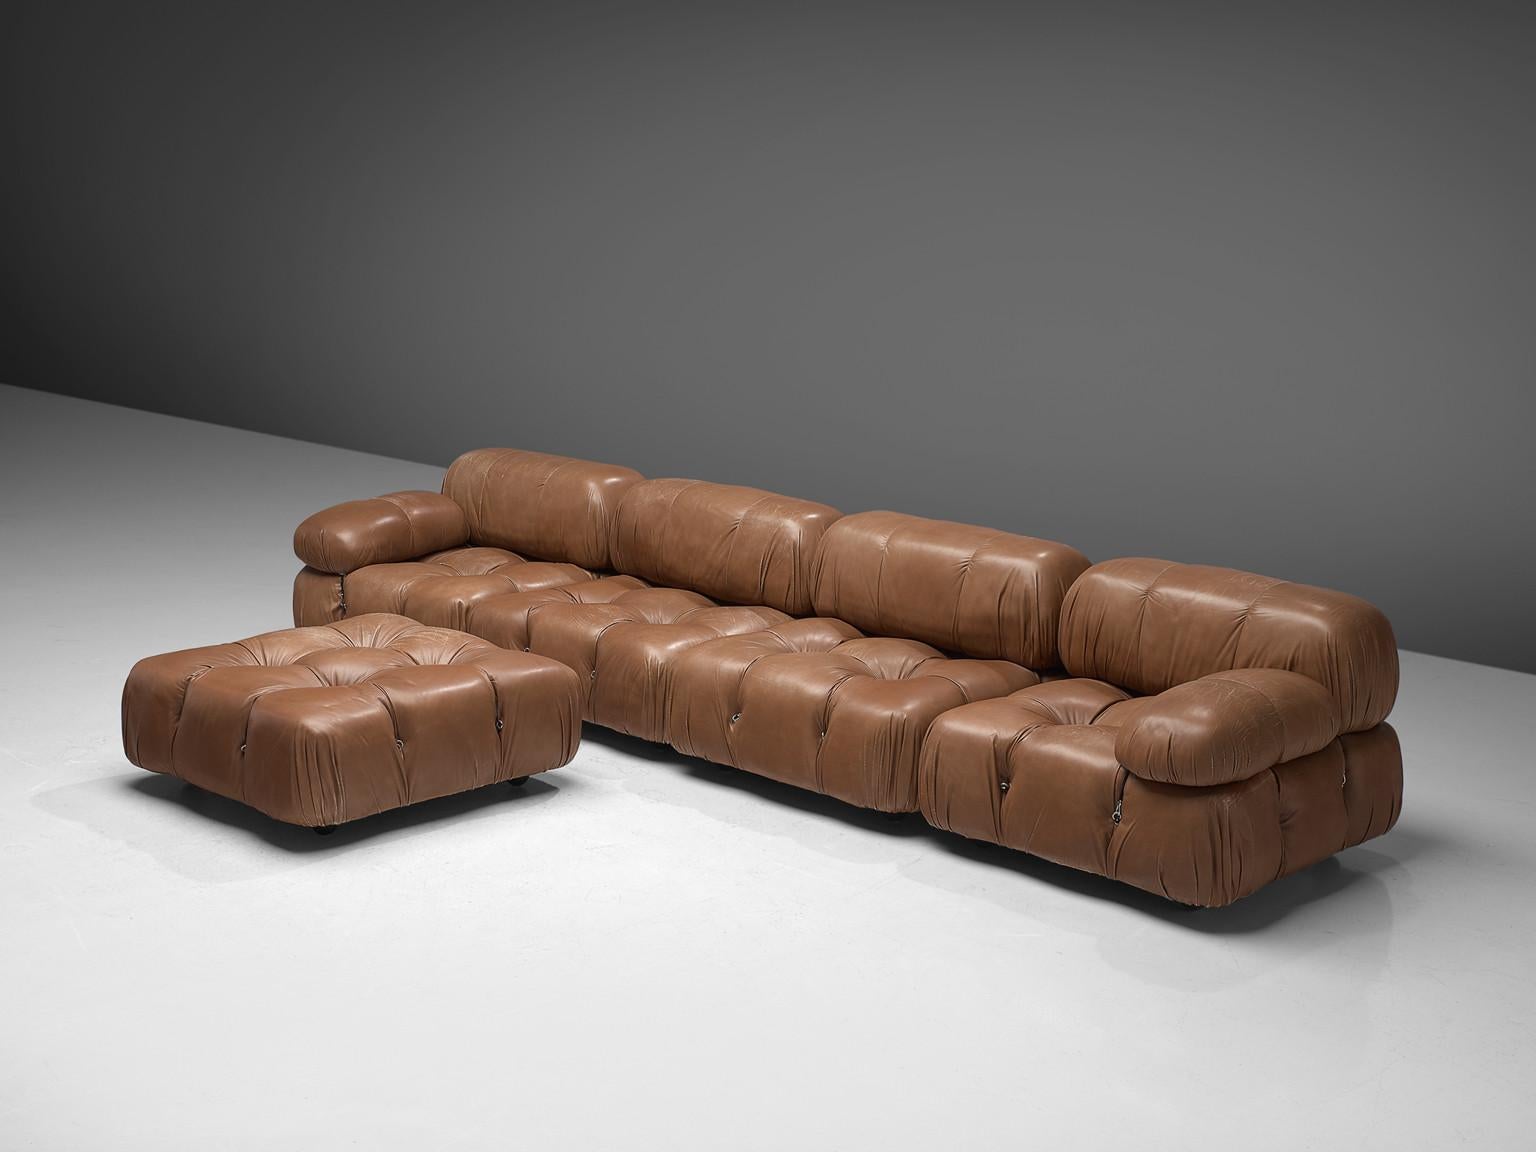 Mario Bellini, modular sofa ‘Camaleonda’, original cognac brown leather, metal, Italy, design 1972

The sectional elements of the ‘Camaleonda’ were designed by Mario Bellini in the 1972 and can be used freely and apart from one another. The backs